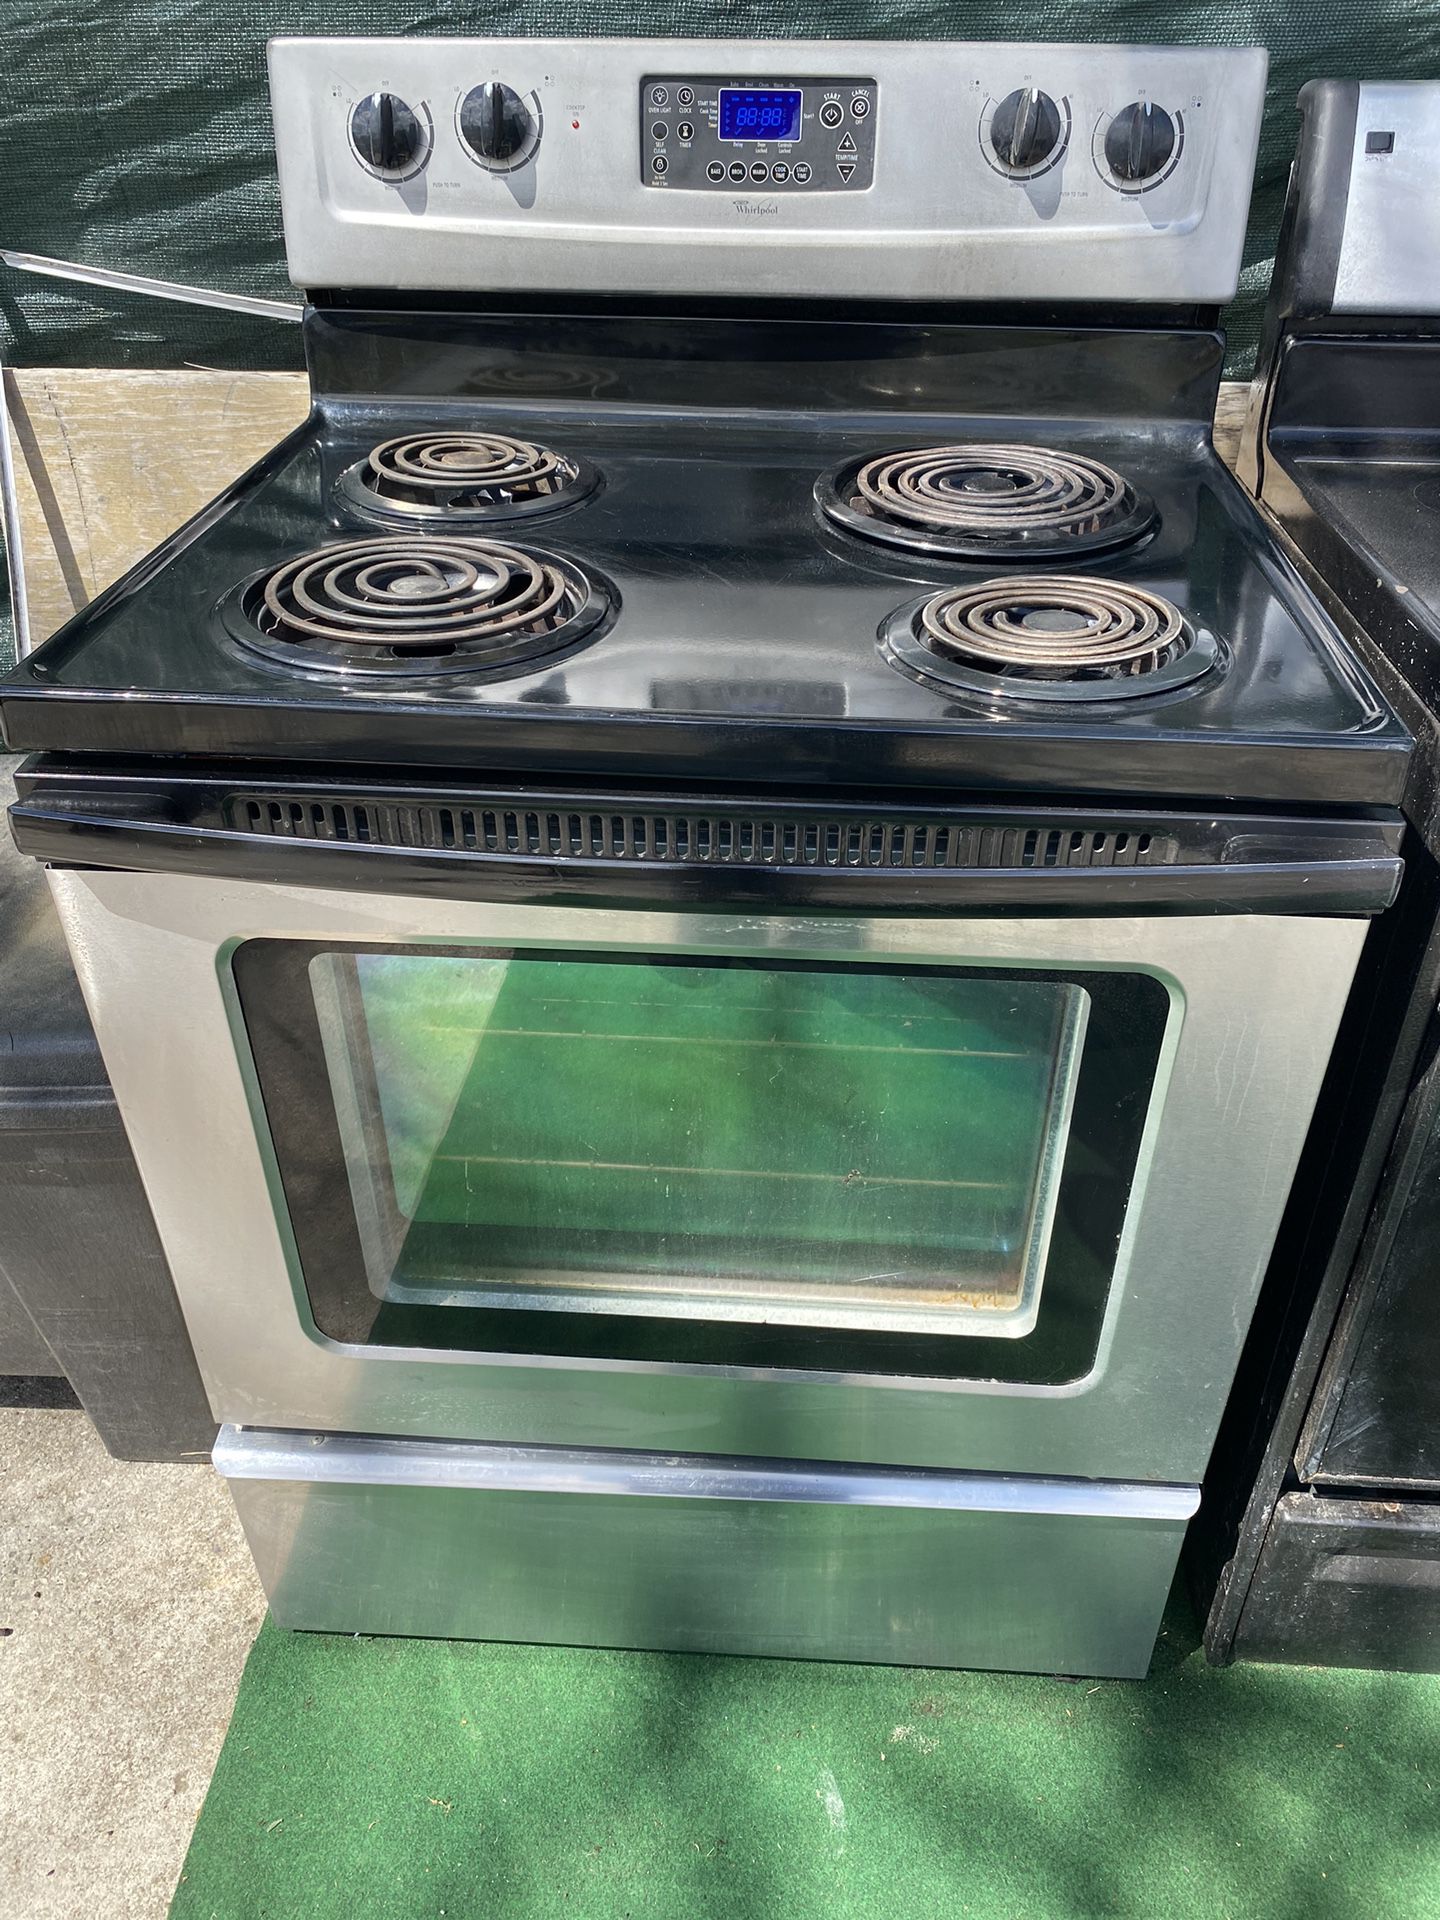 Whirlpool stainless steel stove works excellent no issues $169.30 day warranty